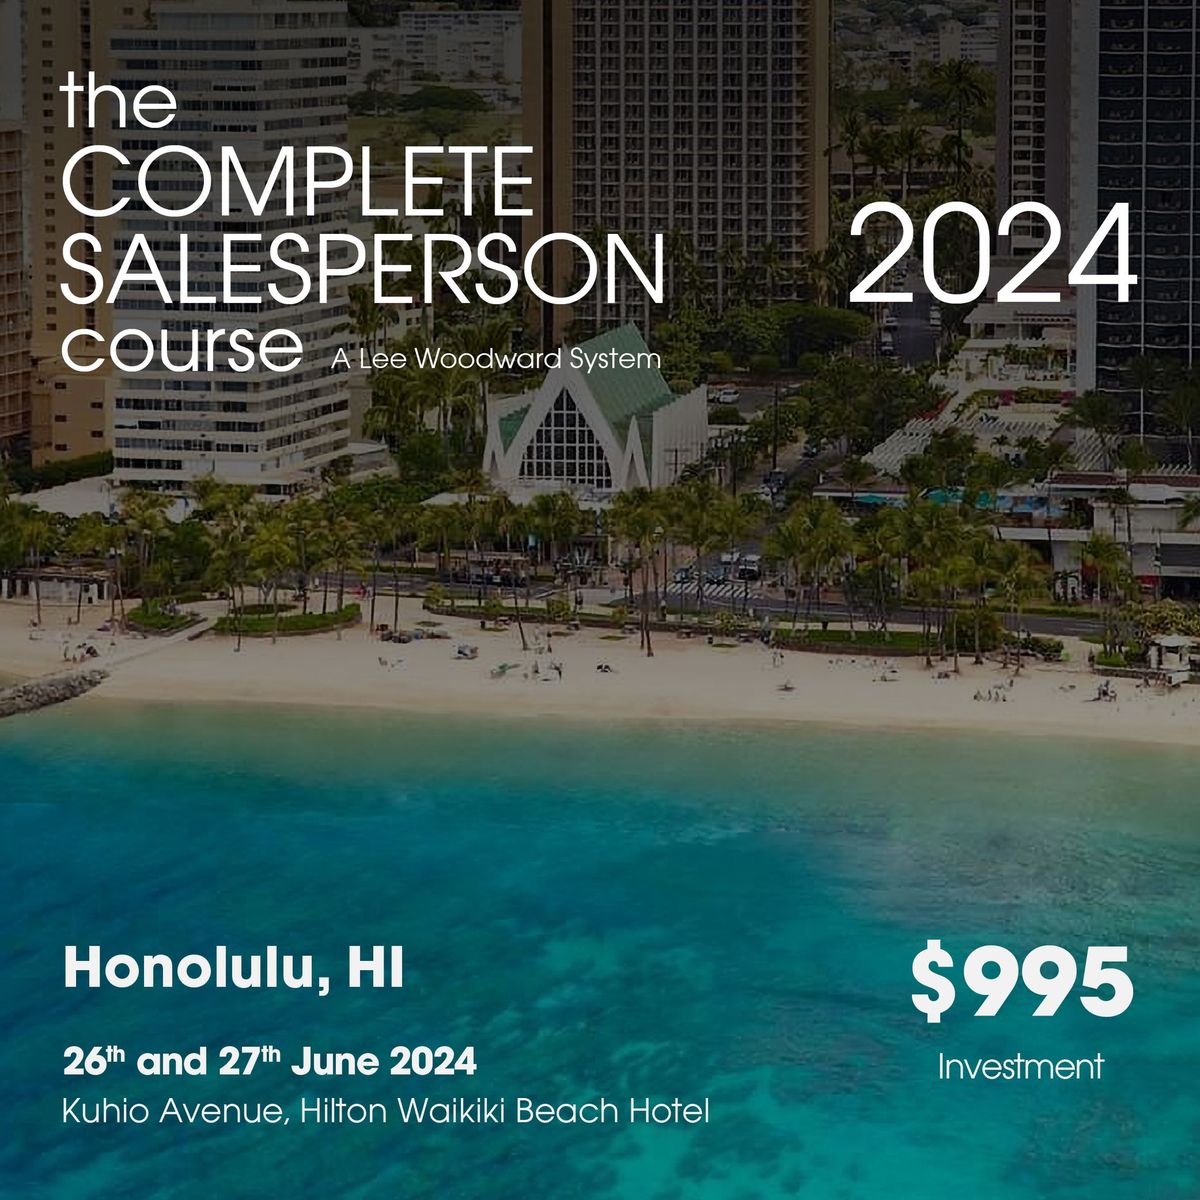 The Complete Salesperson Course Hawaii